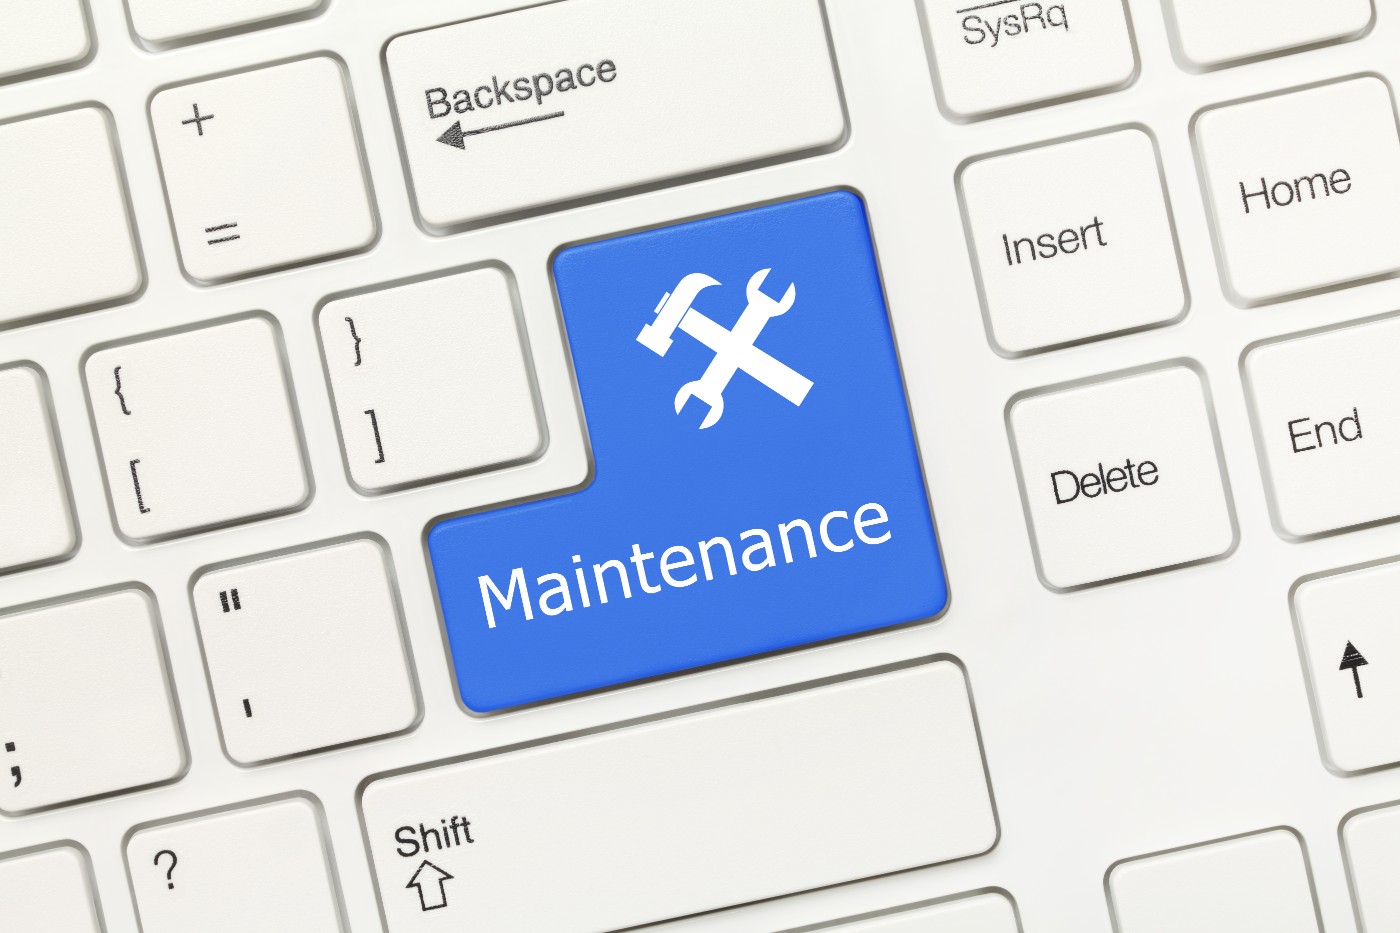 Paper-Based Maintenance Management to Automated Work Order Conversion (CMMS)